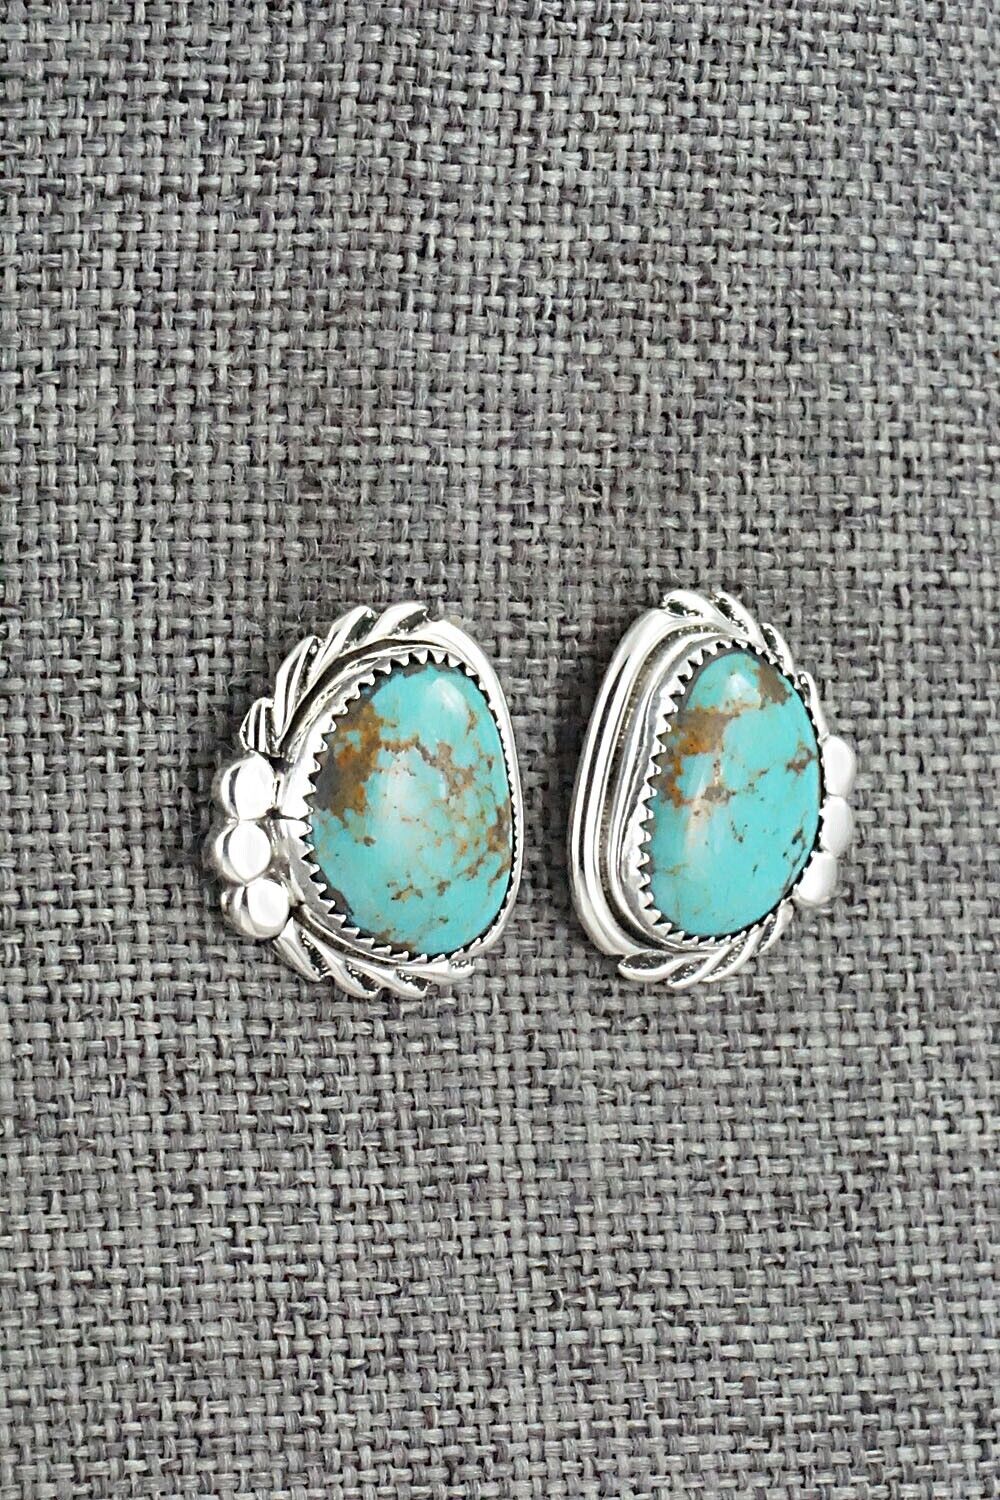 Turquoise and Sterling Silver Earrings - Delores Cadman